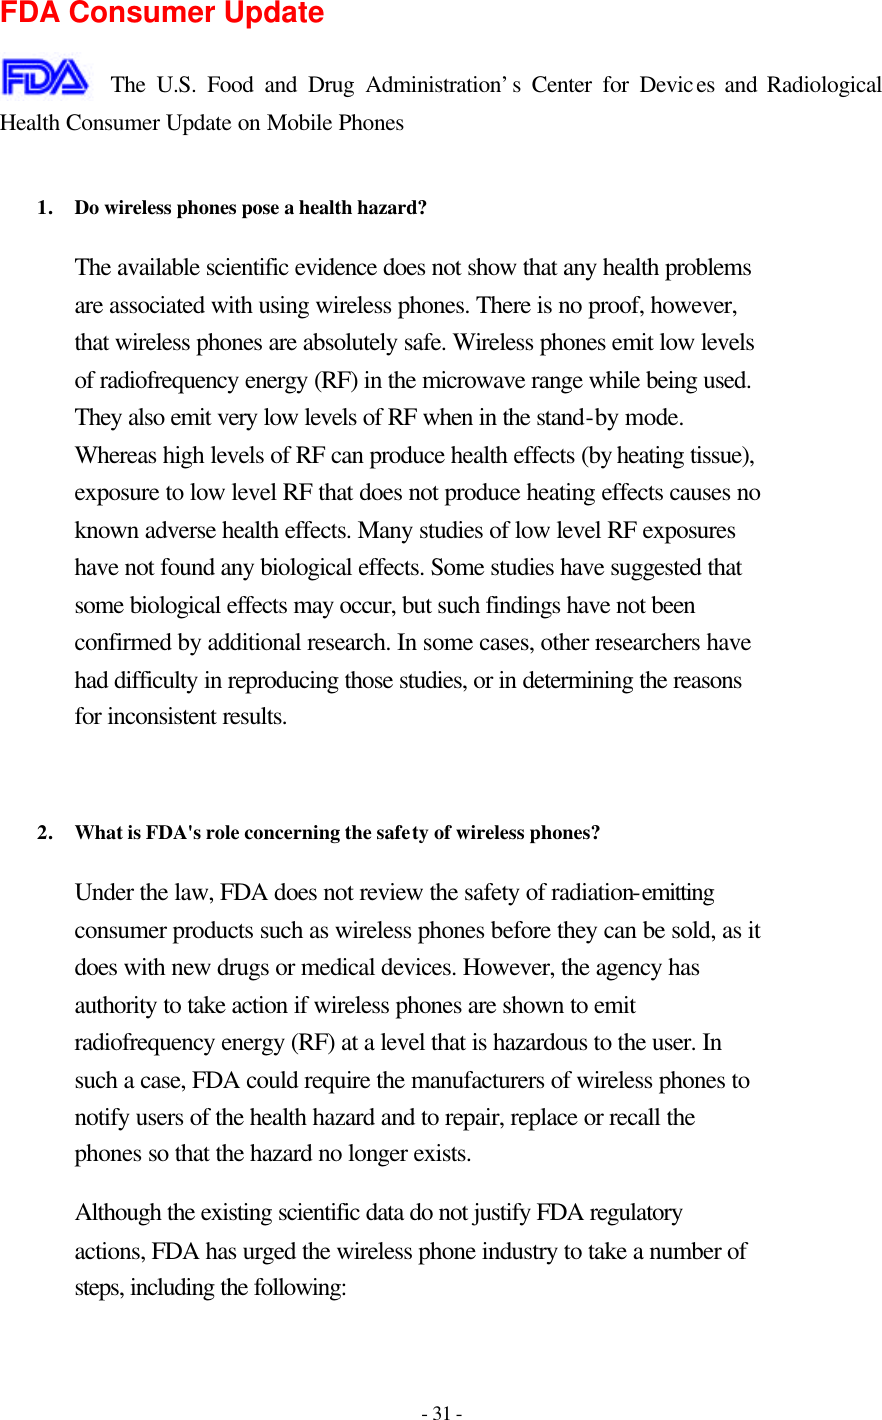 - 31 -  FDA Consumer Update  The U.S. Food and Drug Administration’s Center for Devices and Radiological Health Consumer Update on Mobile Phones  1. Do wireless phones pose a health hazard?  The available scientific evidence does not show that any health problems are associated with using wireless phones. There is no proof, however, that wireless phones are absolutely safe. Wireless phones emit low levels of radiofrequency energy (RF) in the microwave range while being used. They also emit very low levels of RF when in the stand-by mode. Whereas high levels of RF can produce health effects (by heating tissue), exposure to low level RF that does not produce heating effects causes no known adverse health effects. Many studies of low level RF exposures have not found any biological effects. Some studies have suggested that some biological effects may occur, but such findings have not been confirmed by additional research. In some cases, other researchers have had difficulty in reproducing those studies, or in determining the reasons for inconsistent results.   2. What is FDA&apos;s role concerning the safety of wireless phones?  Under the law, FDA does not review the safety of radiation-emitting consumer products such as wireless phones before they can be sold, as it does with new drugs or medical devices. However, the agency has authority to take action if wireless phones are shown to emit radiofrequency energy (RF) at a level that is hazardous to the user. In such a case, FDA could require the manufacturers of wireless phones to notify users of the health hazard and to repair, replace or recall the phones so that the hazard no longer exists. Although the existing scientific data do not justify FDA regulatory actions, FDA has urged the wireless phone industry to take a number of steps, including the following: 